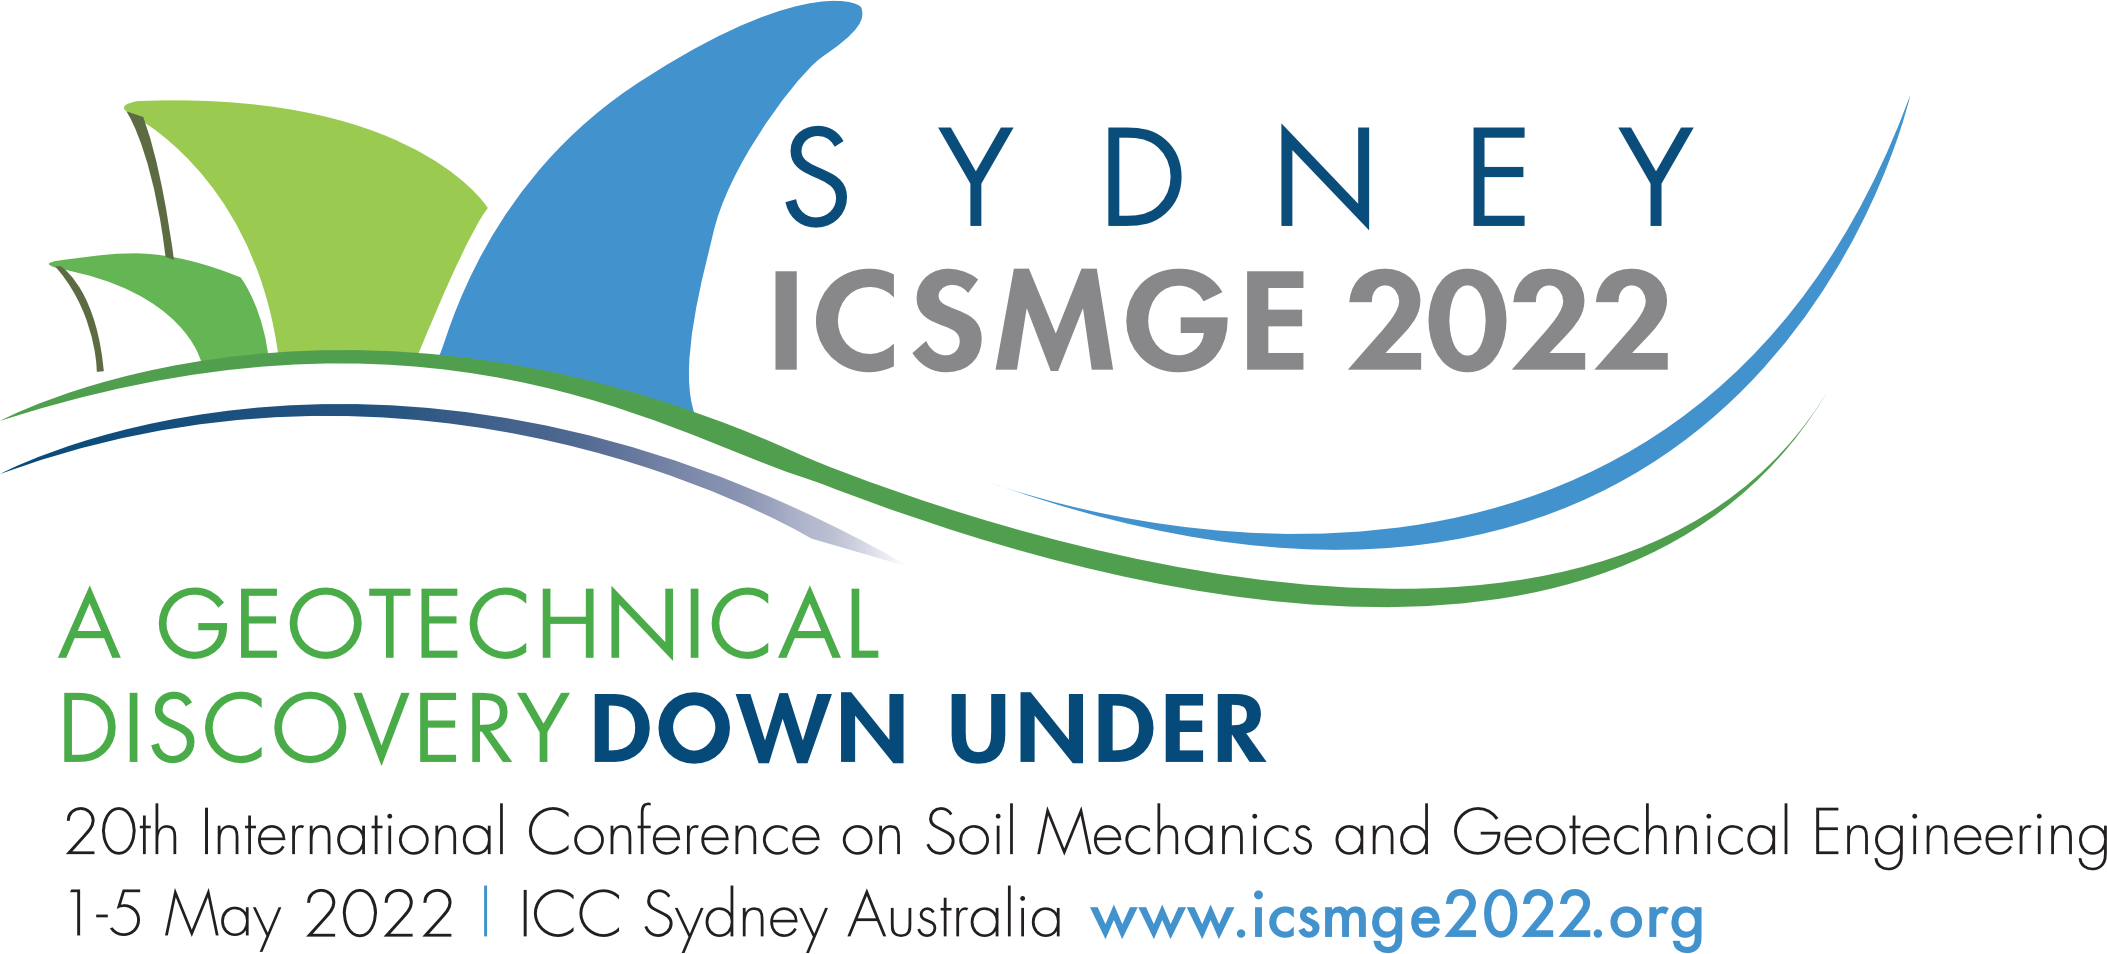 Dimitrios Zekkos to deliver "Powerful Informative Talk" (PIT) on Geotechnical Autonomy at Sydney 20th ICSMGE 